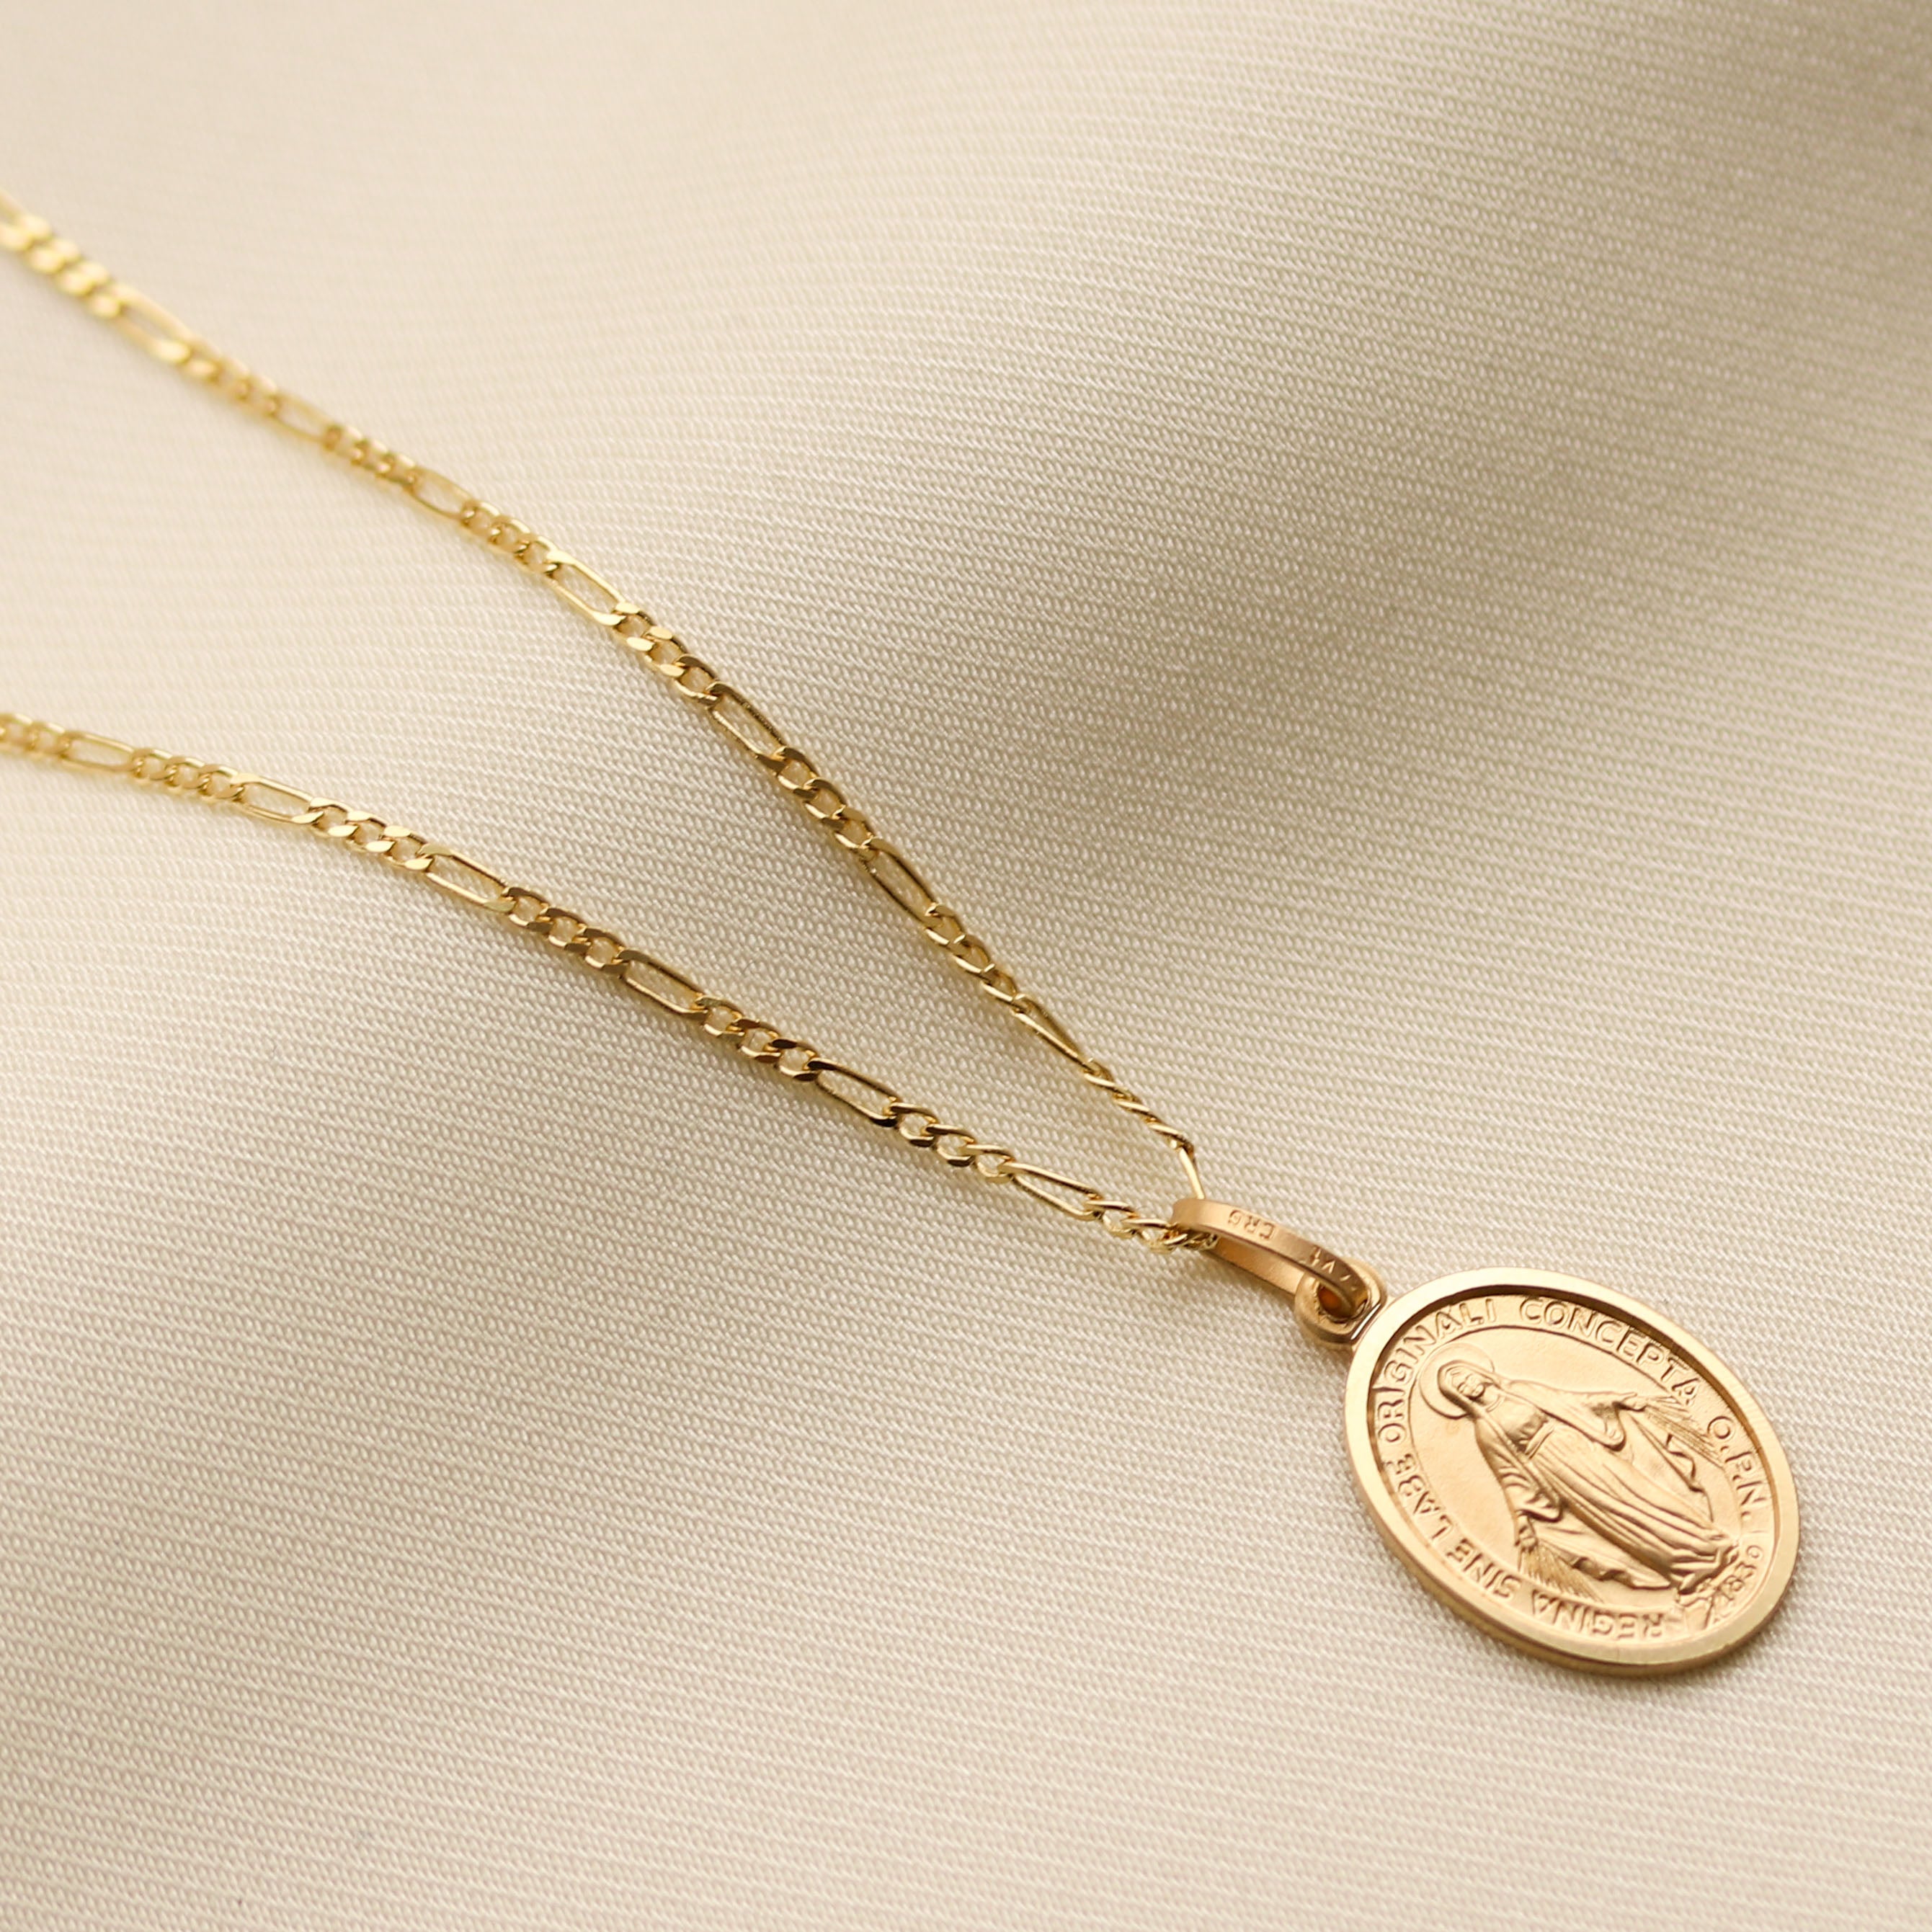 1oz Gold Coin Necklace - American Eagle Lady Liberty Coin - IF & Co.